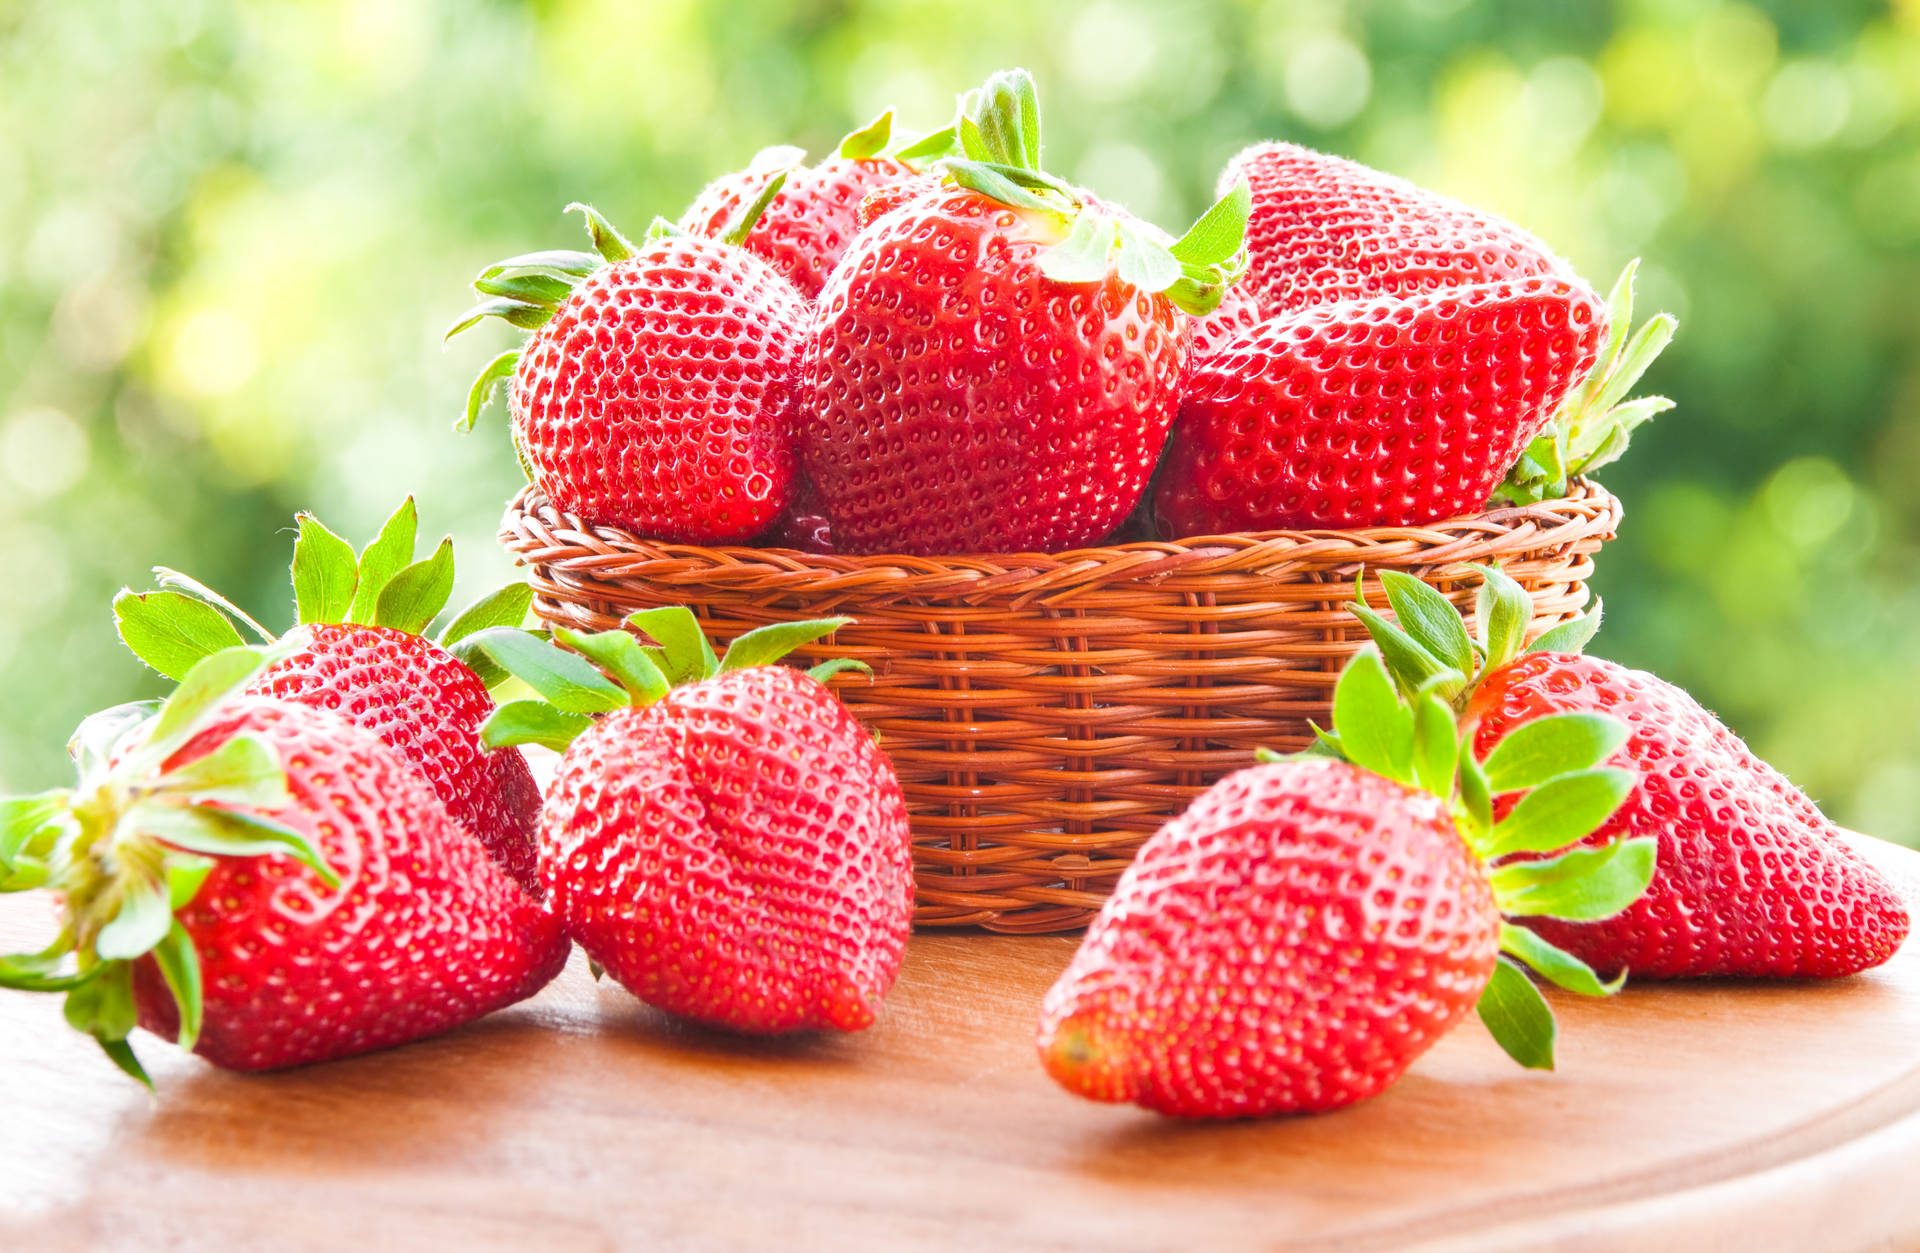 Wholesome Basket Of Strawberries Wallpaper